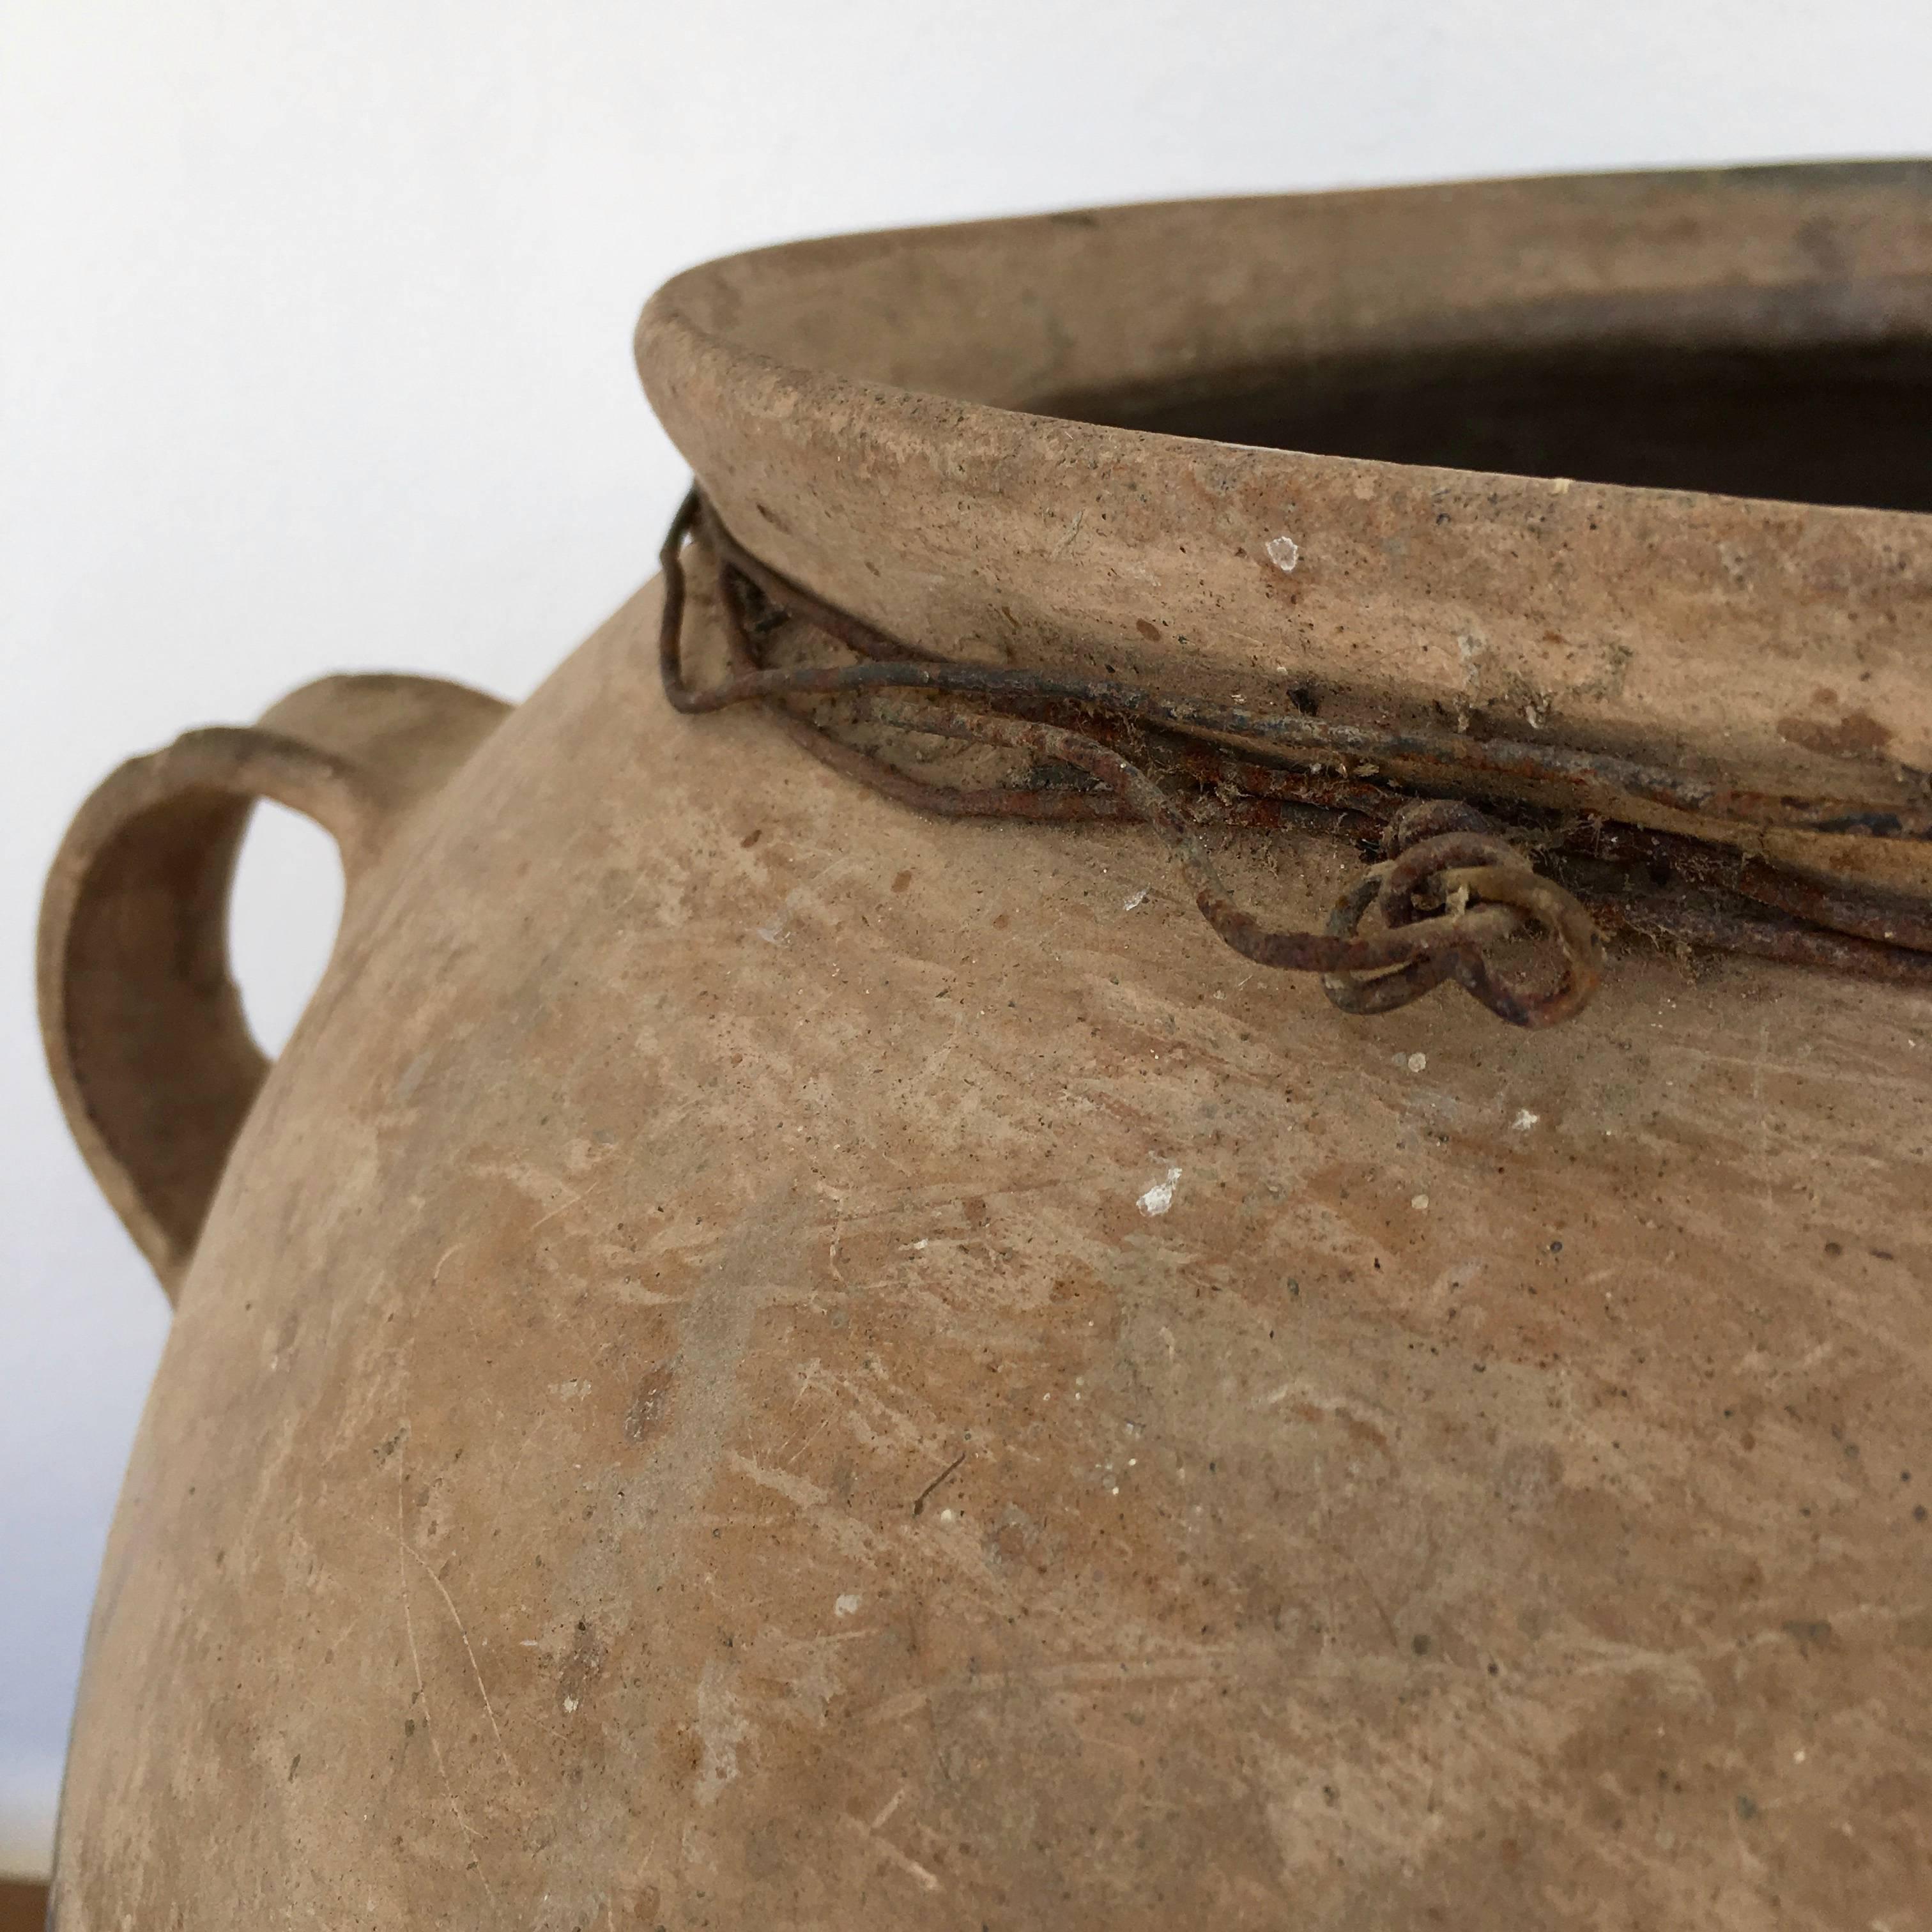 Rustic Traditional Ceramic Water Pot from the Puebla Highlands of Mexico